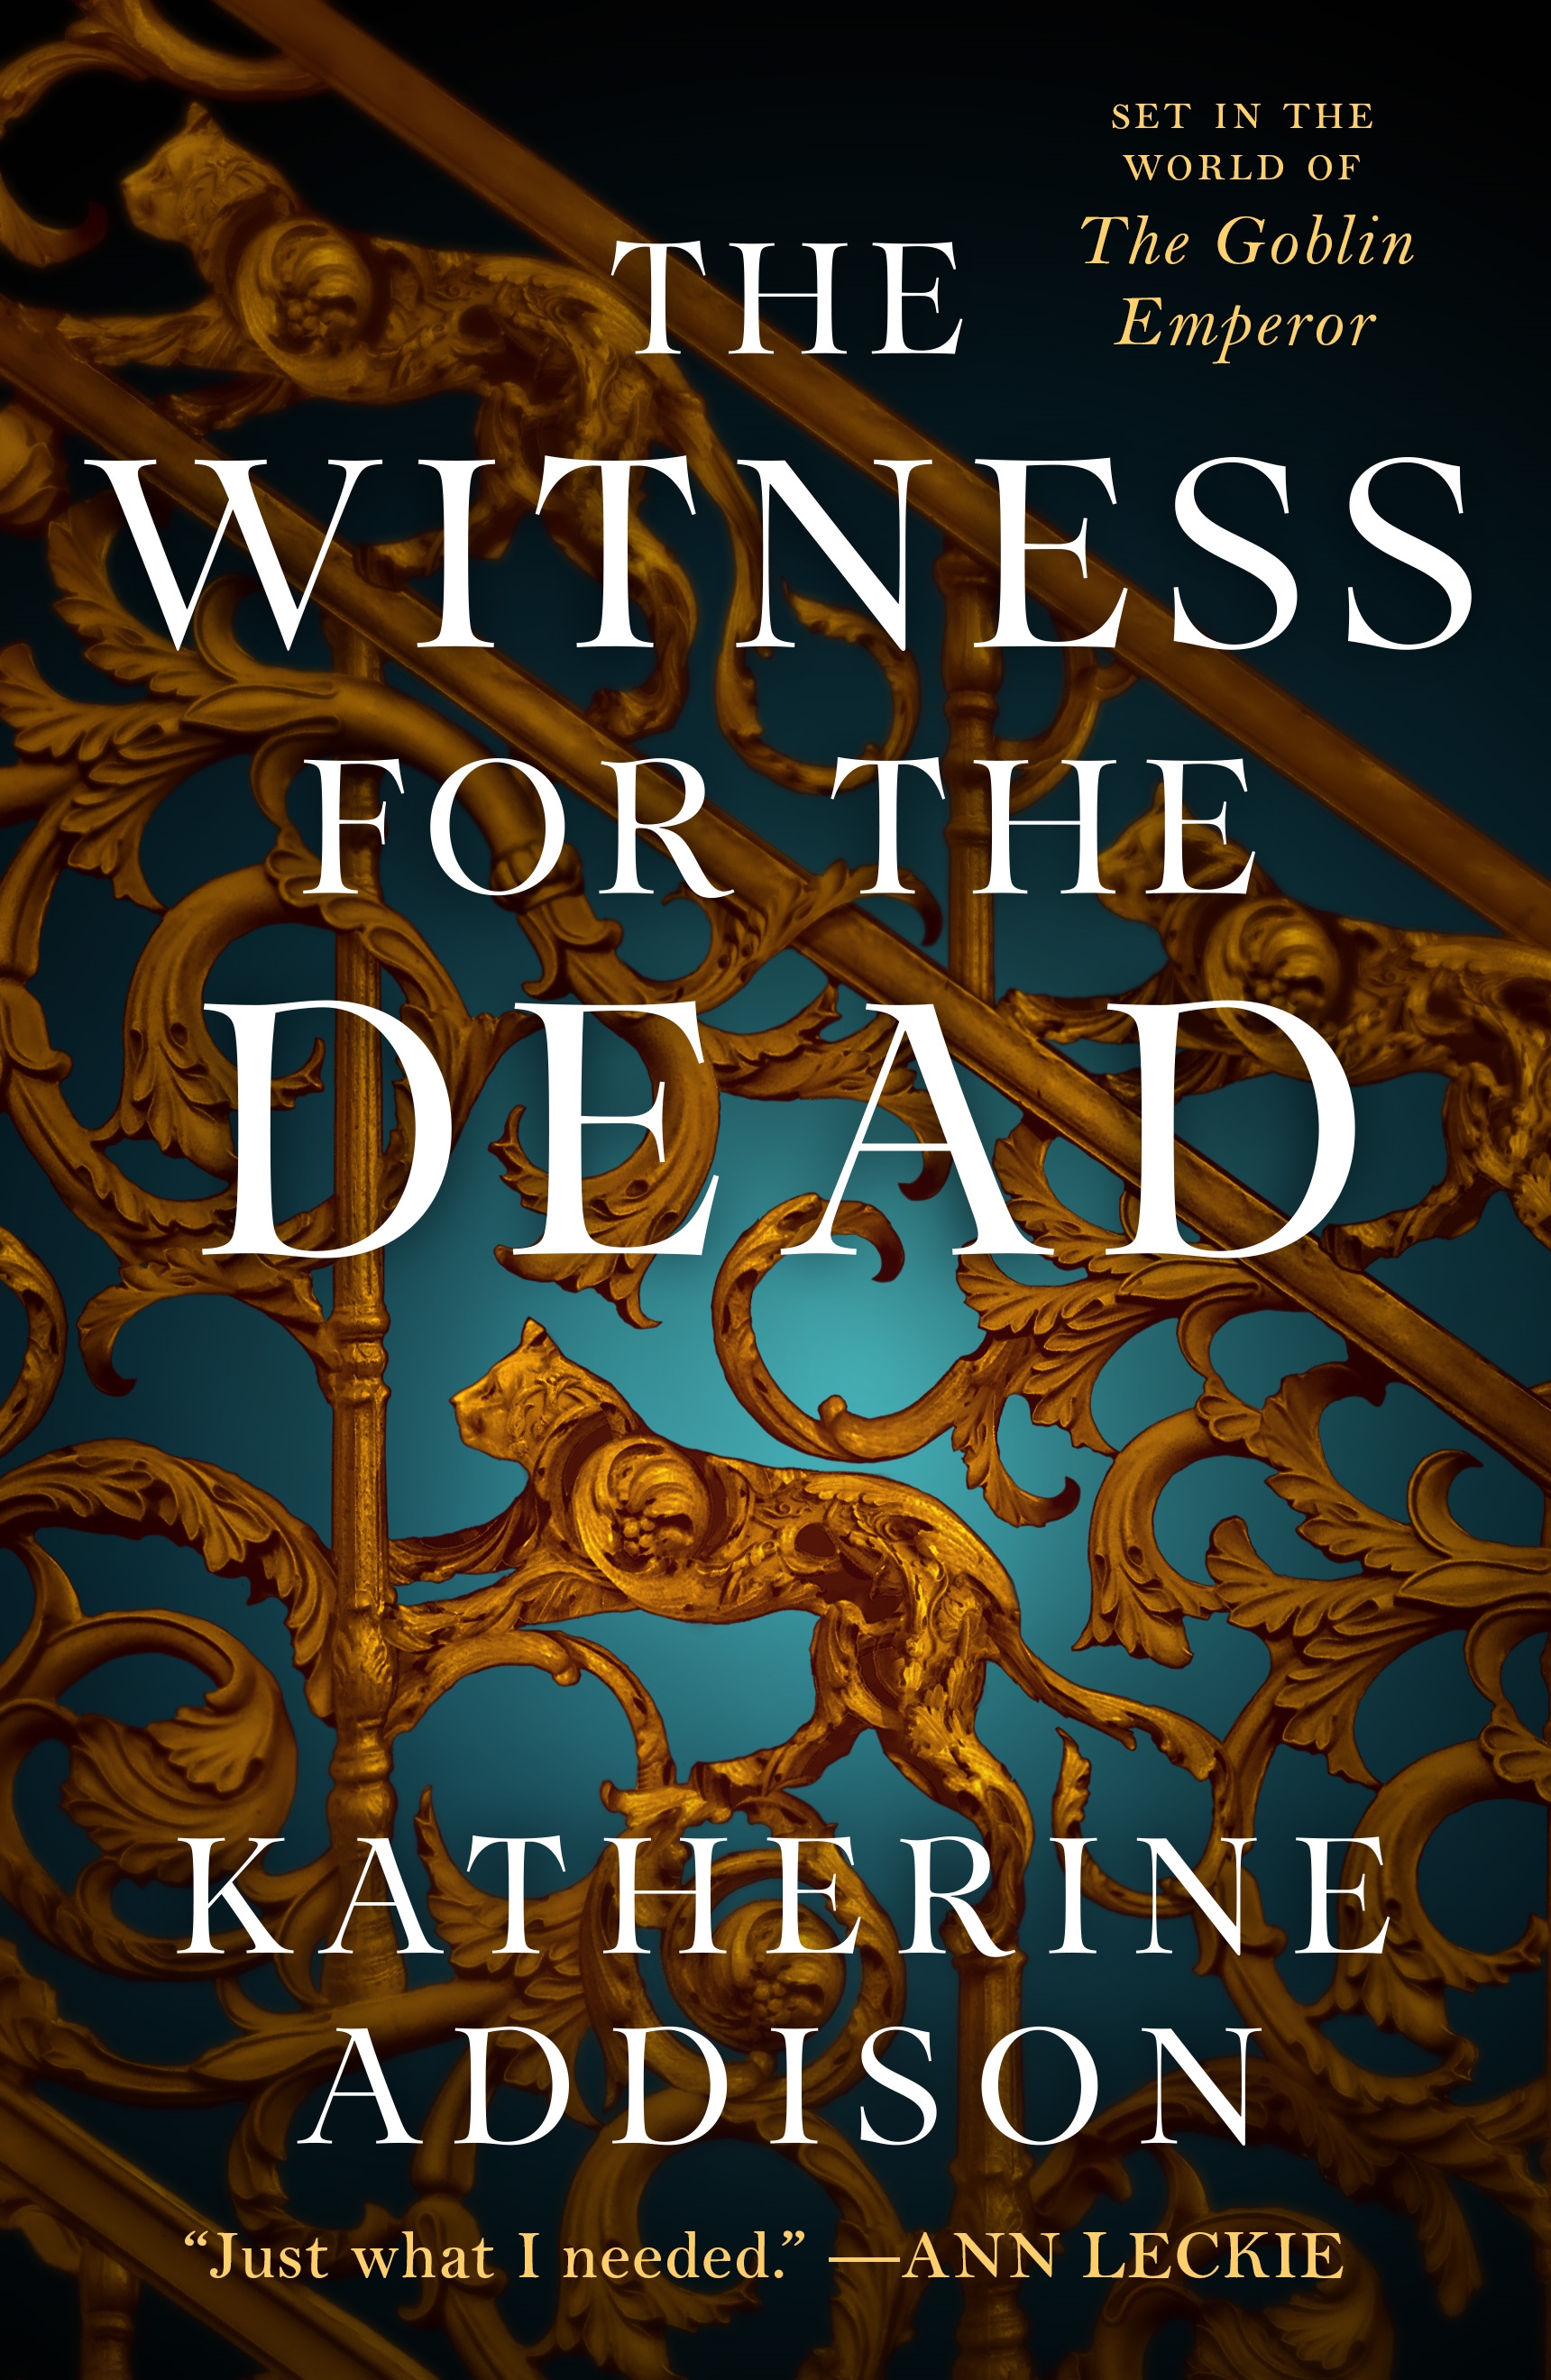 The Witness for the Dead : Book One of the Cemeteries of Amalo Trilogy by Katherine Addison